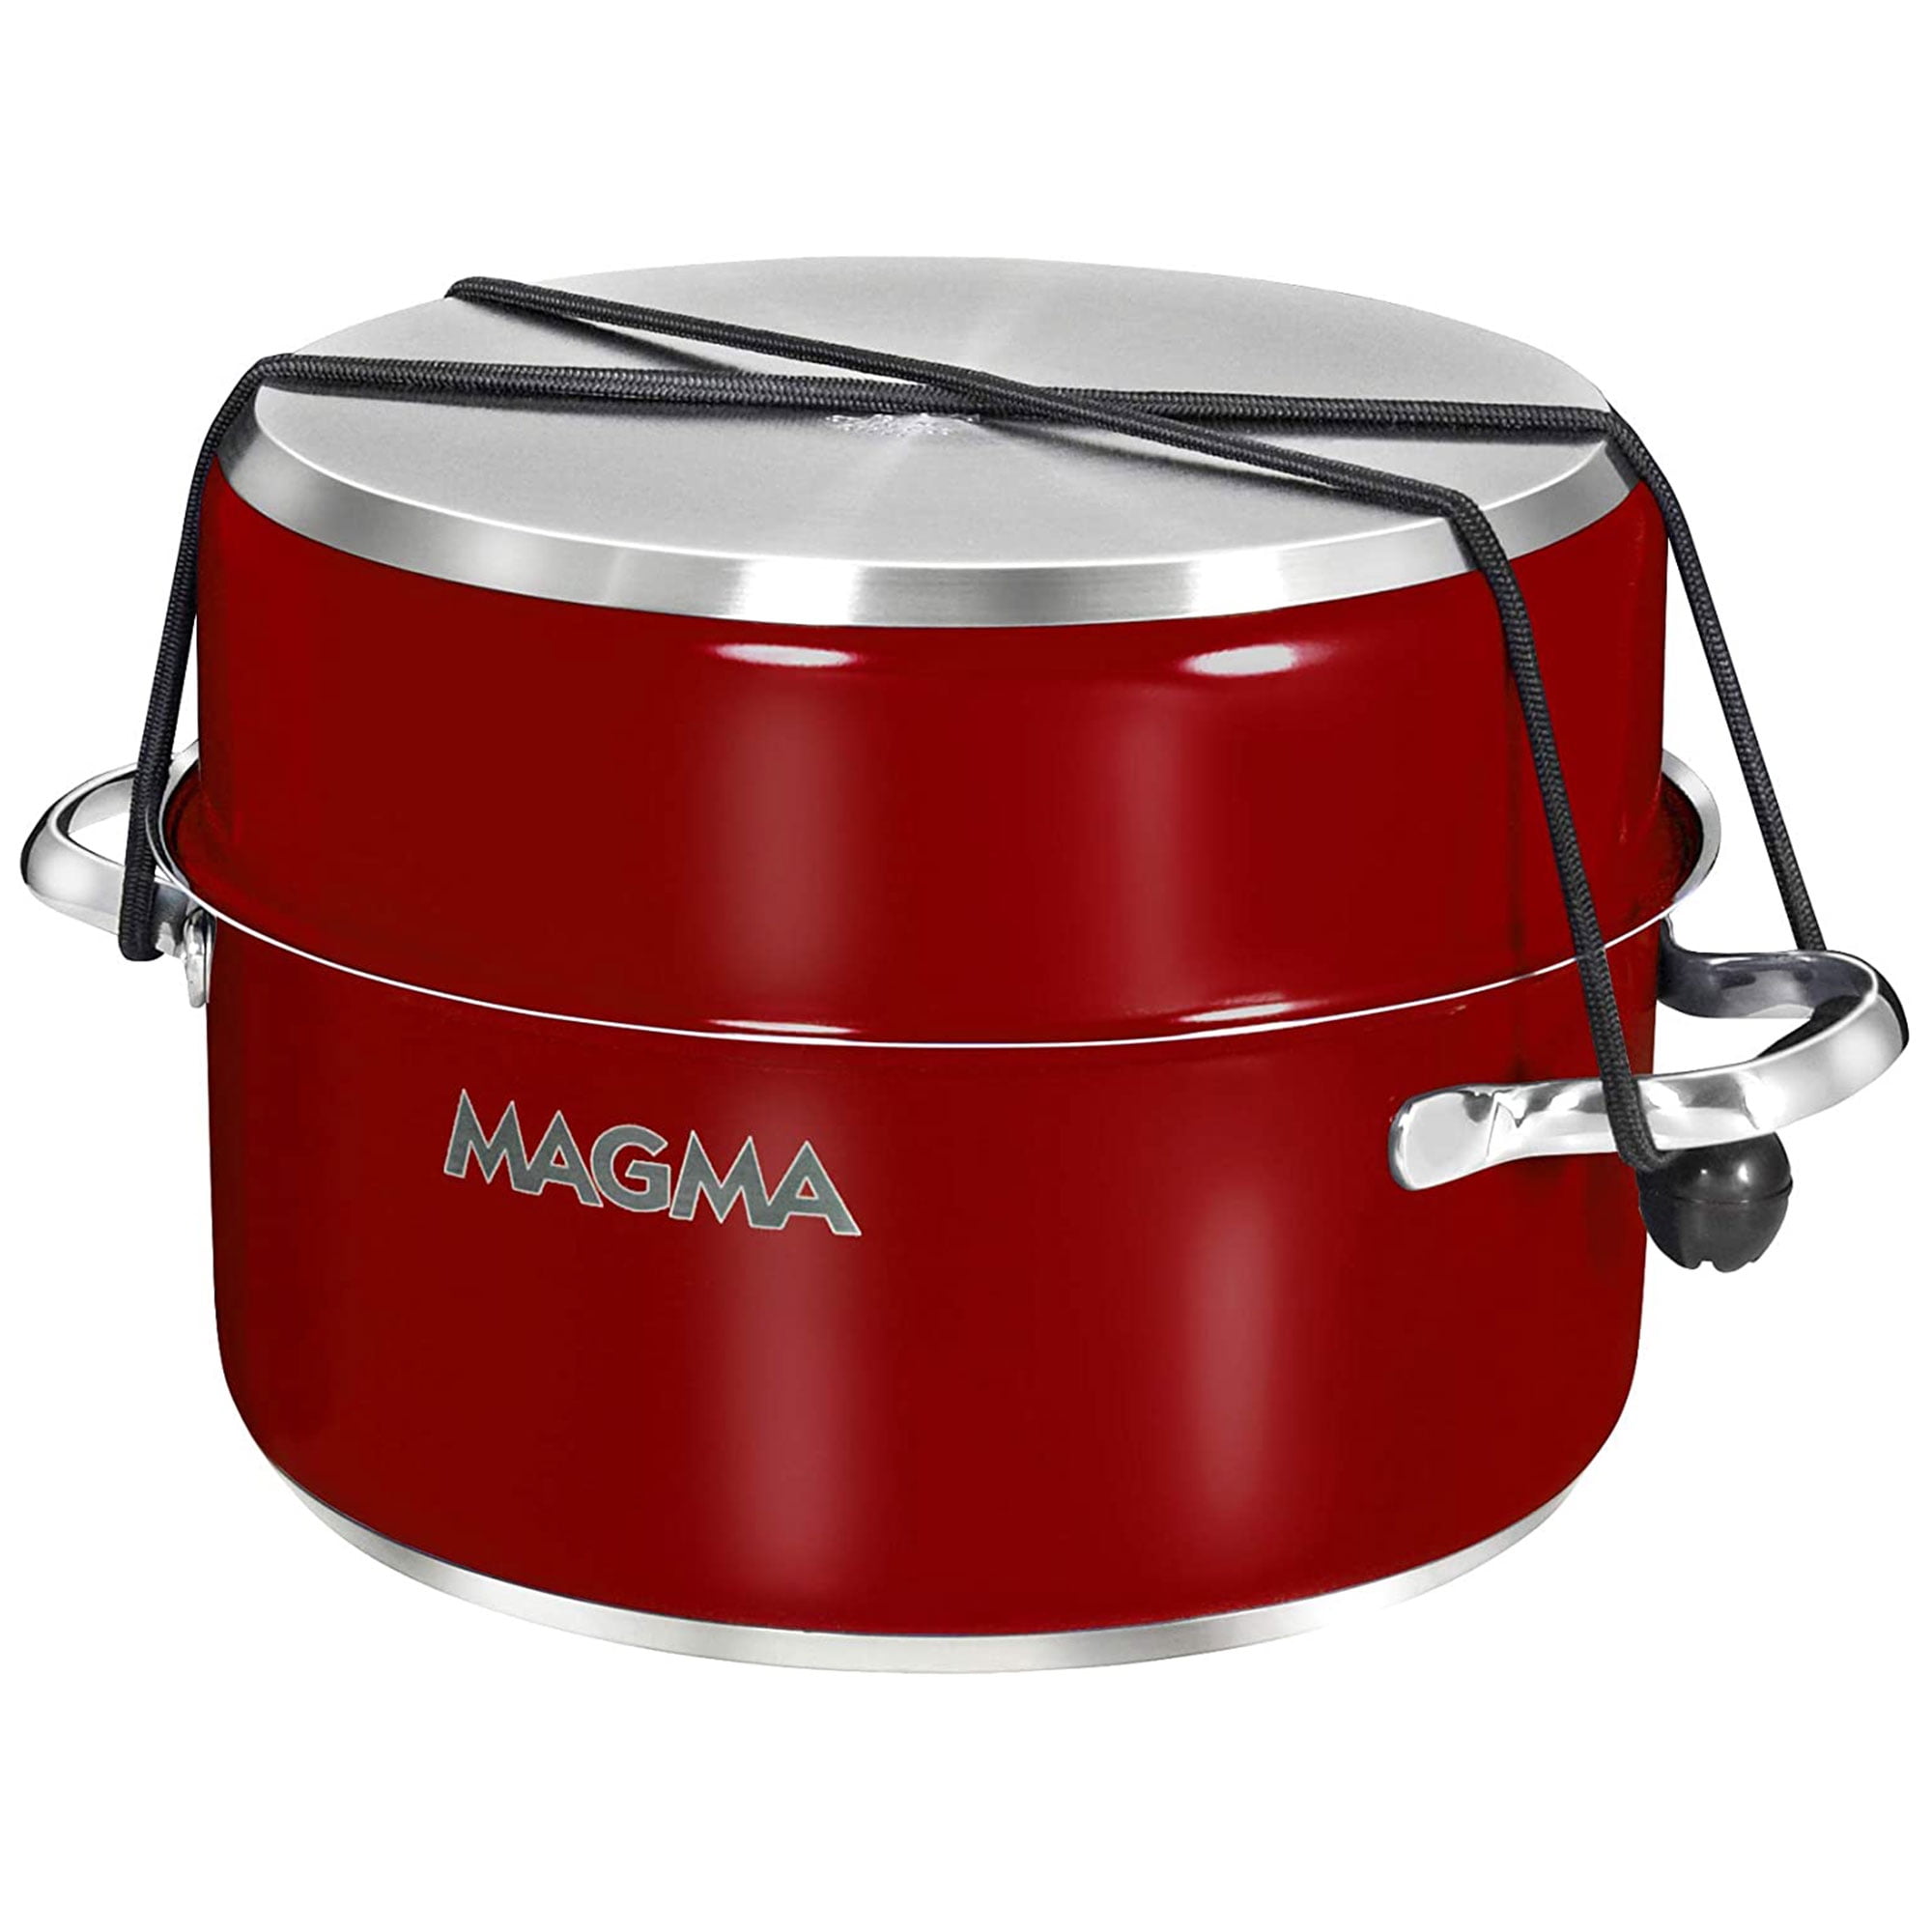 Magma 7 pc. Stainless Induction Cookware w/ Ceramica